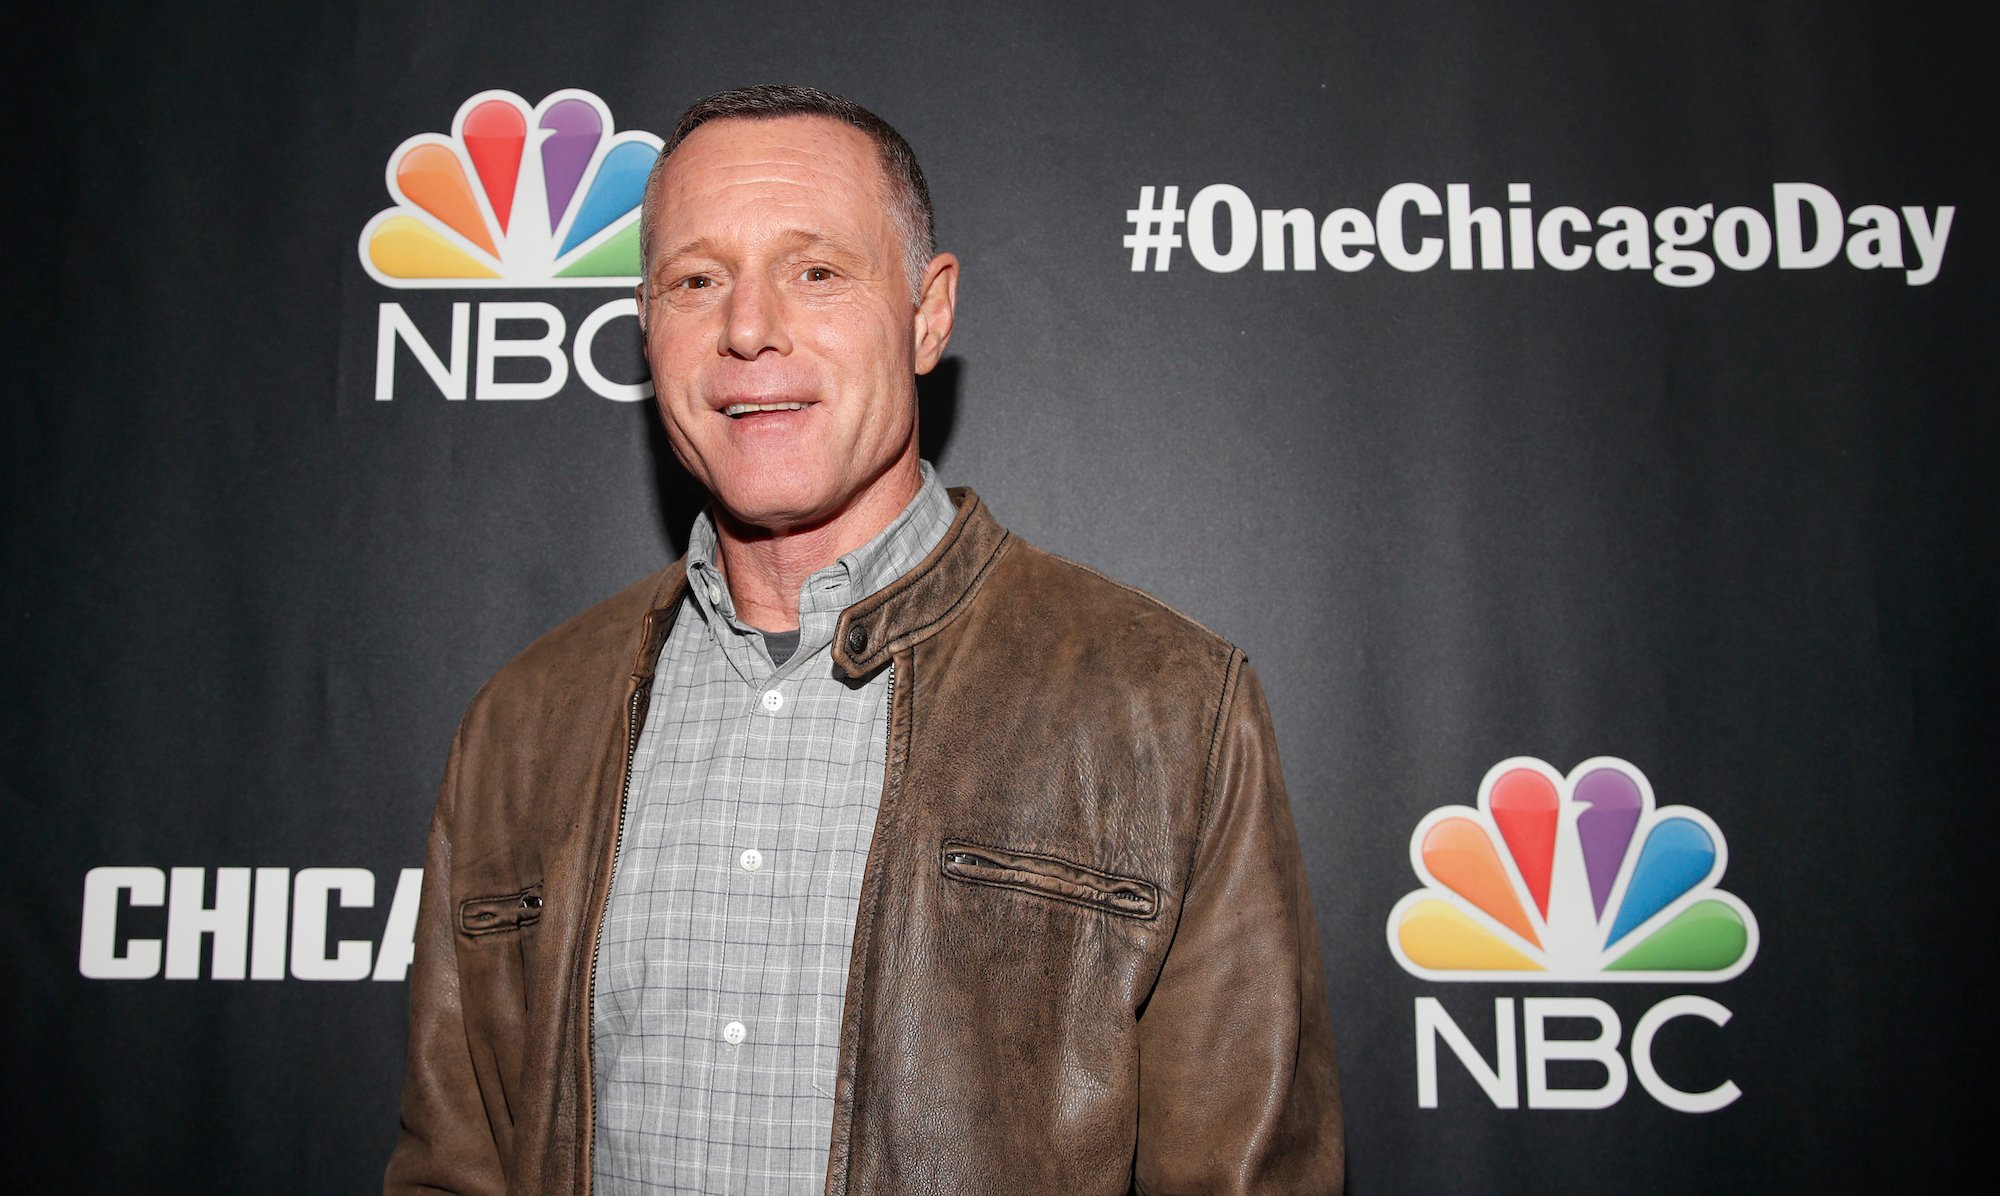 ‘Chicago P.D.’: What Is Jason Beghe’s Net Worth?